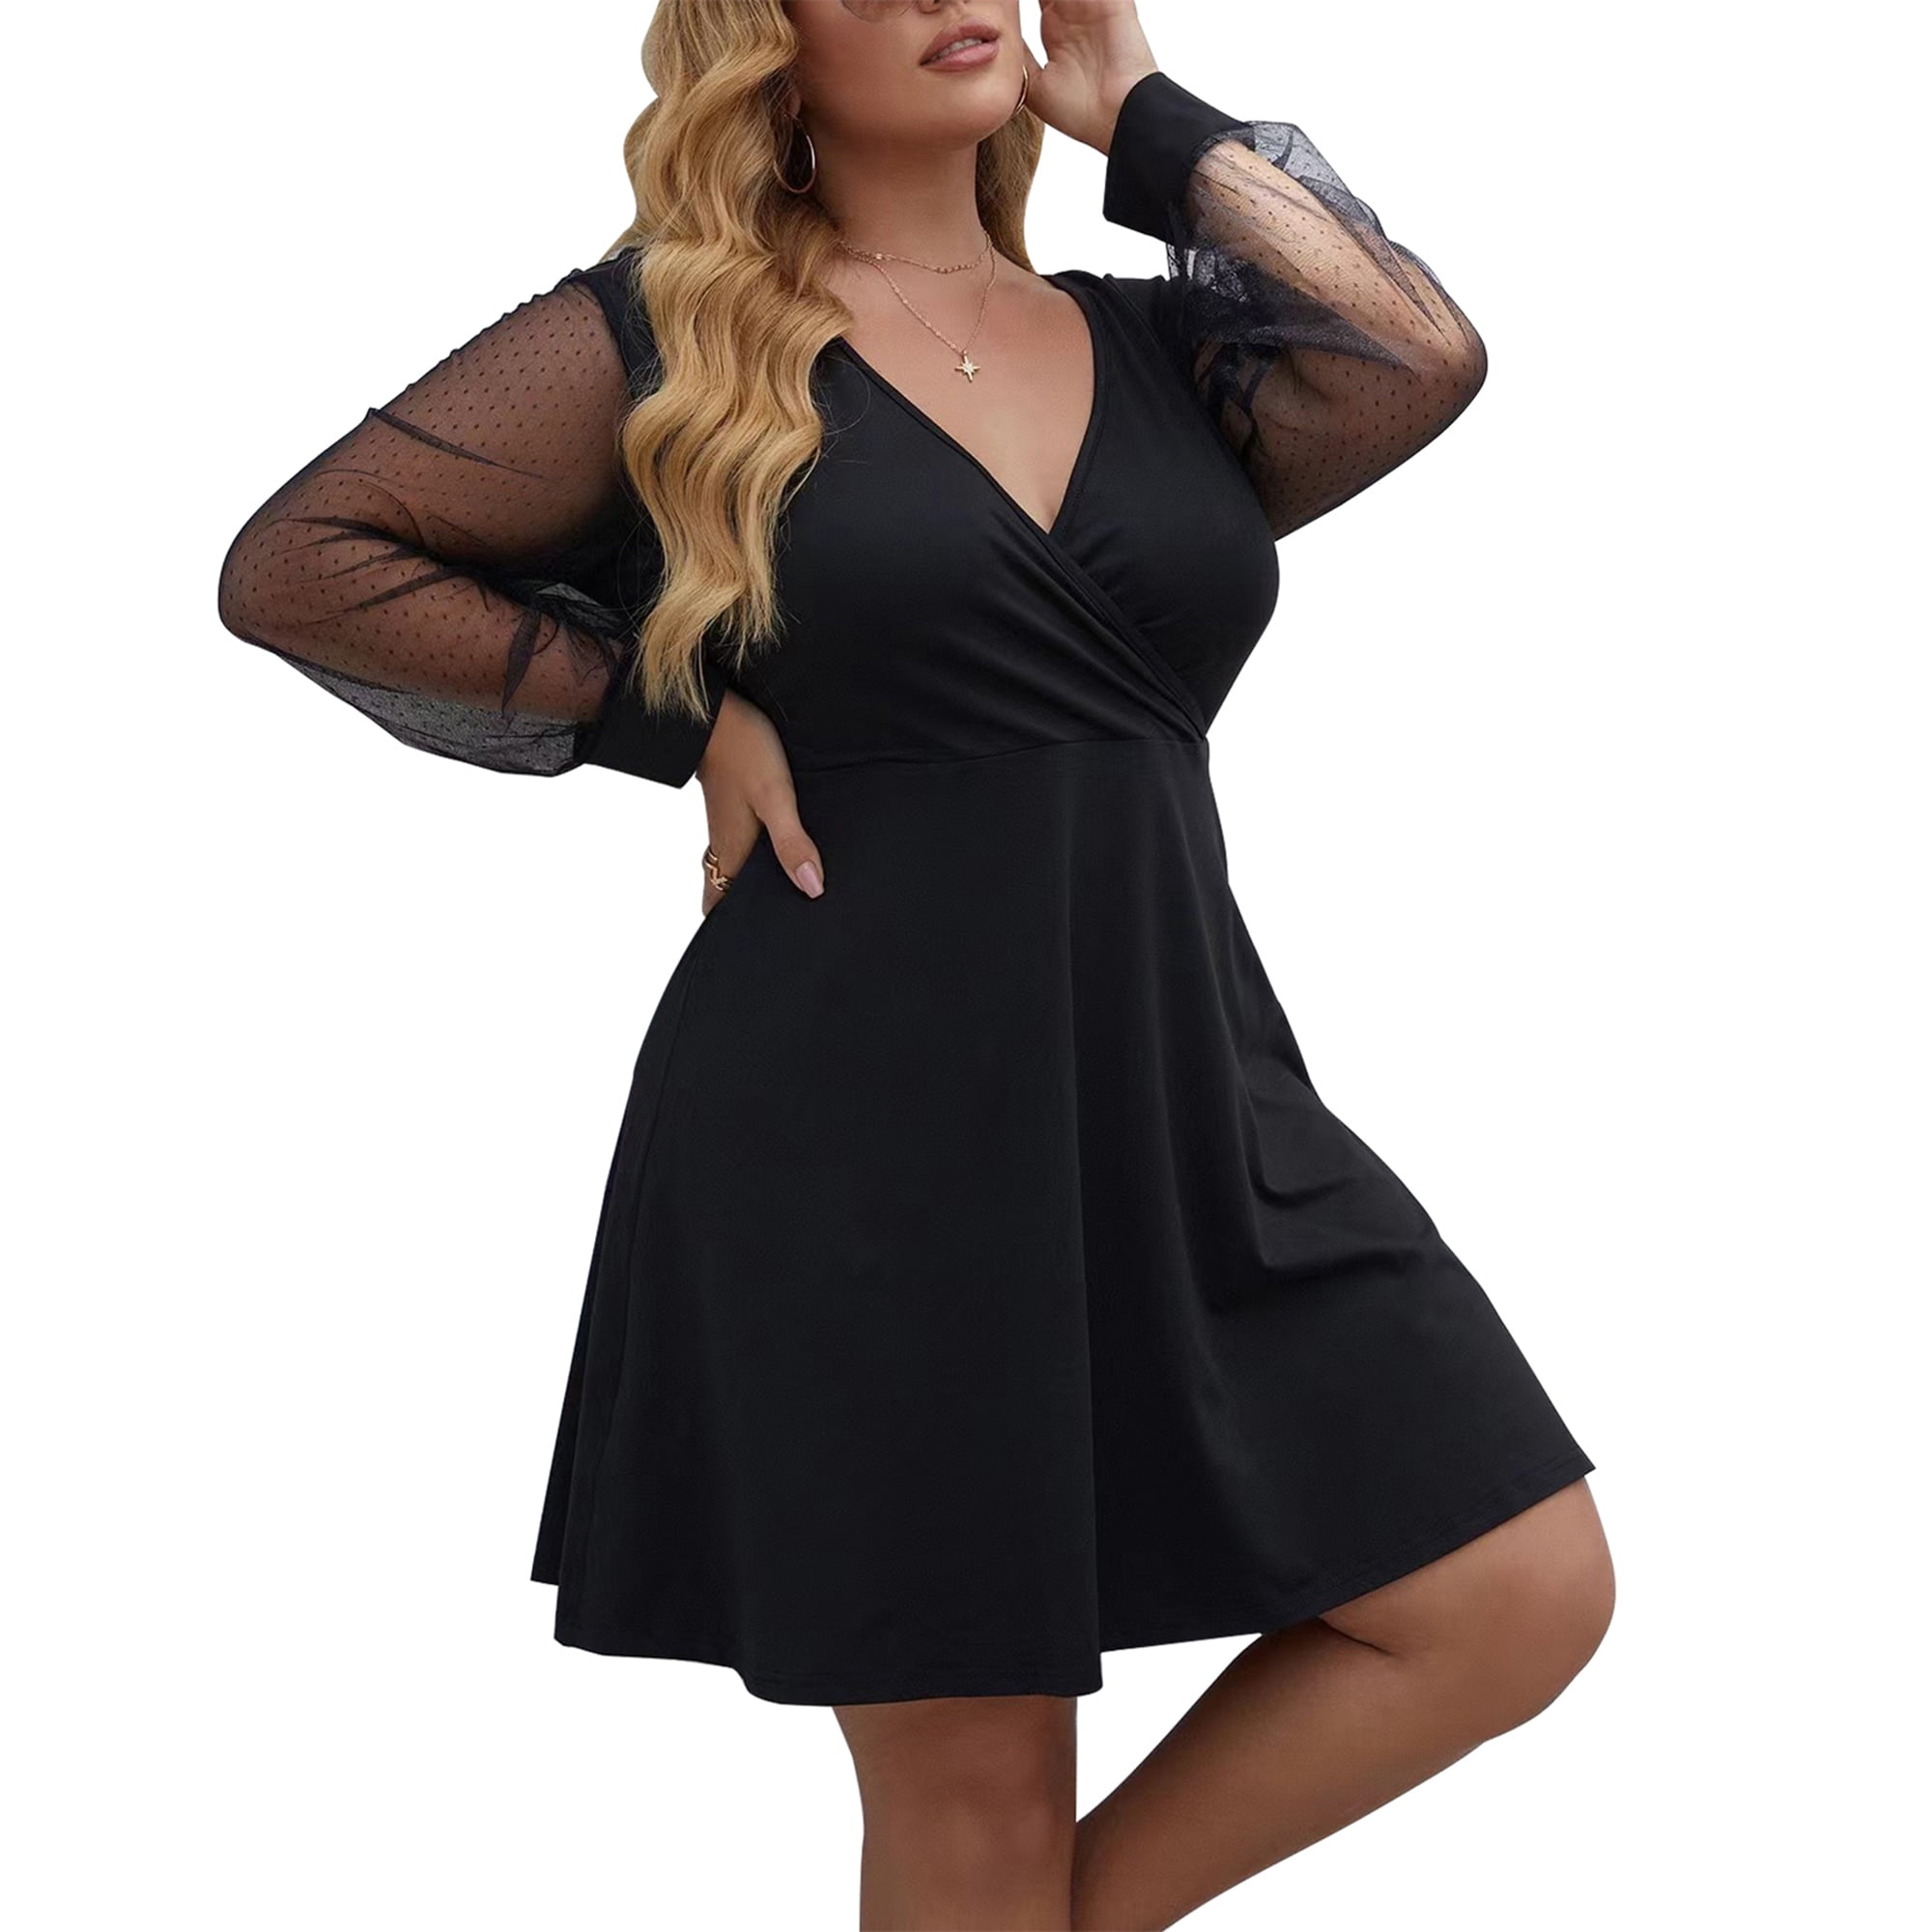 SCOMCHIC Female Plus Size Deep V-Neck Sexy Long Sleeve Black Dress for Party  Prom L 